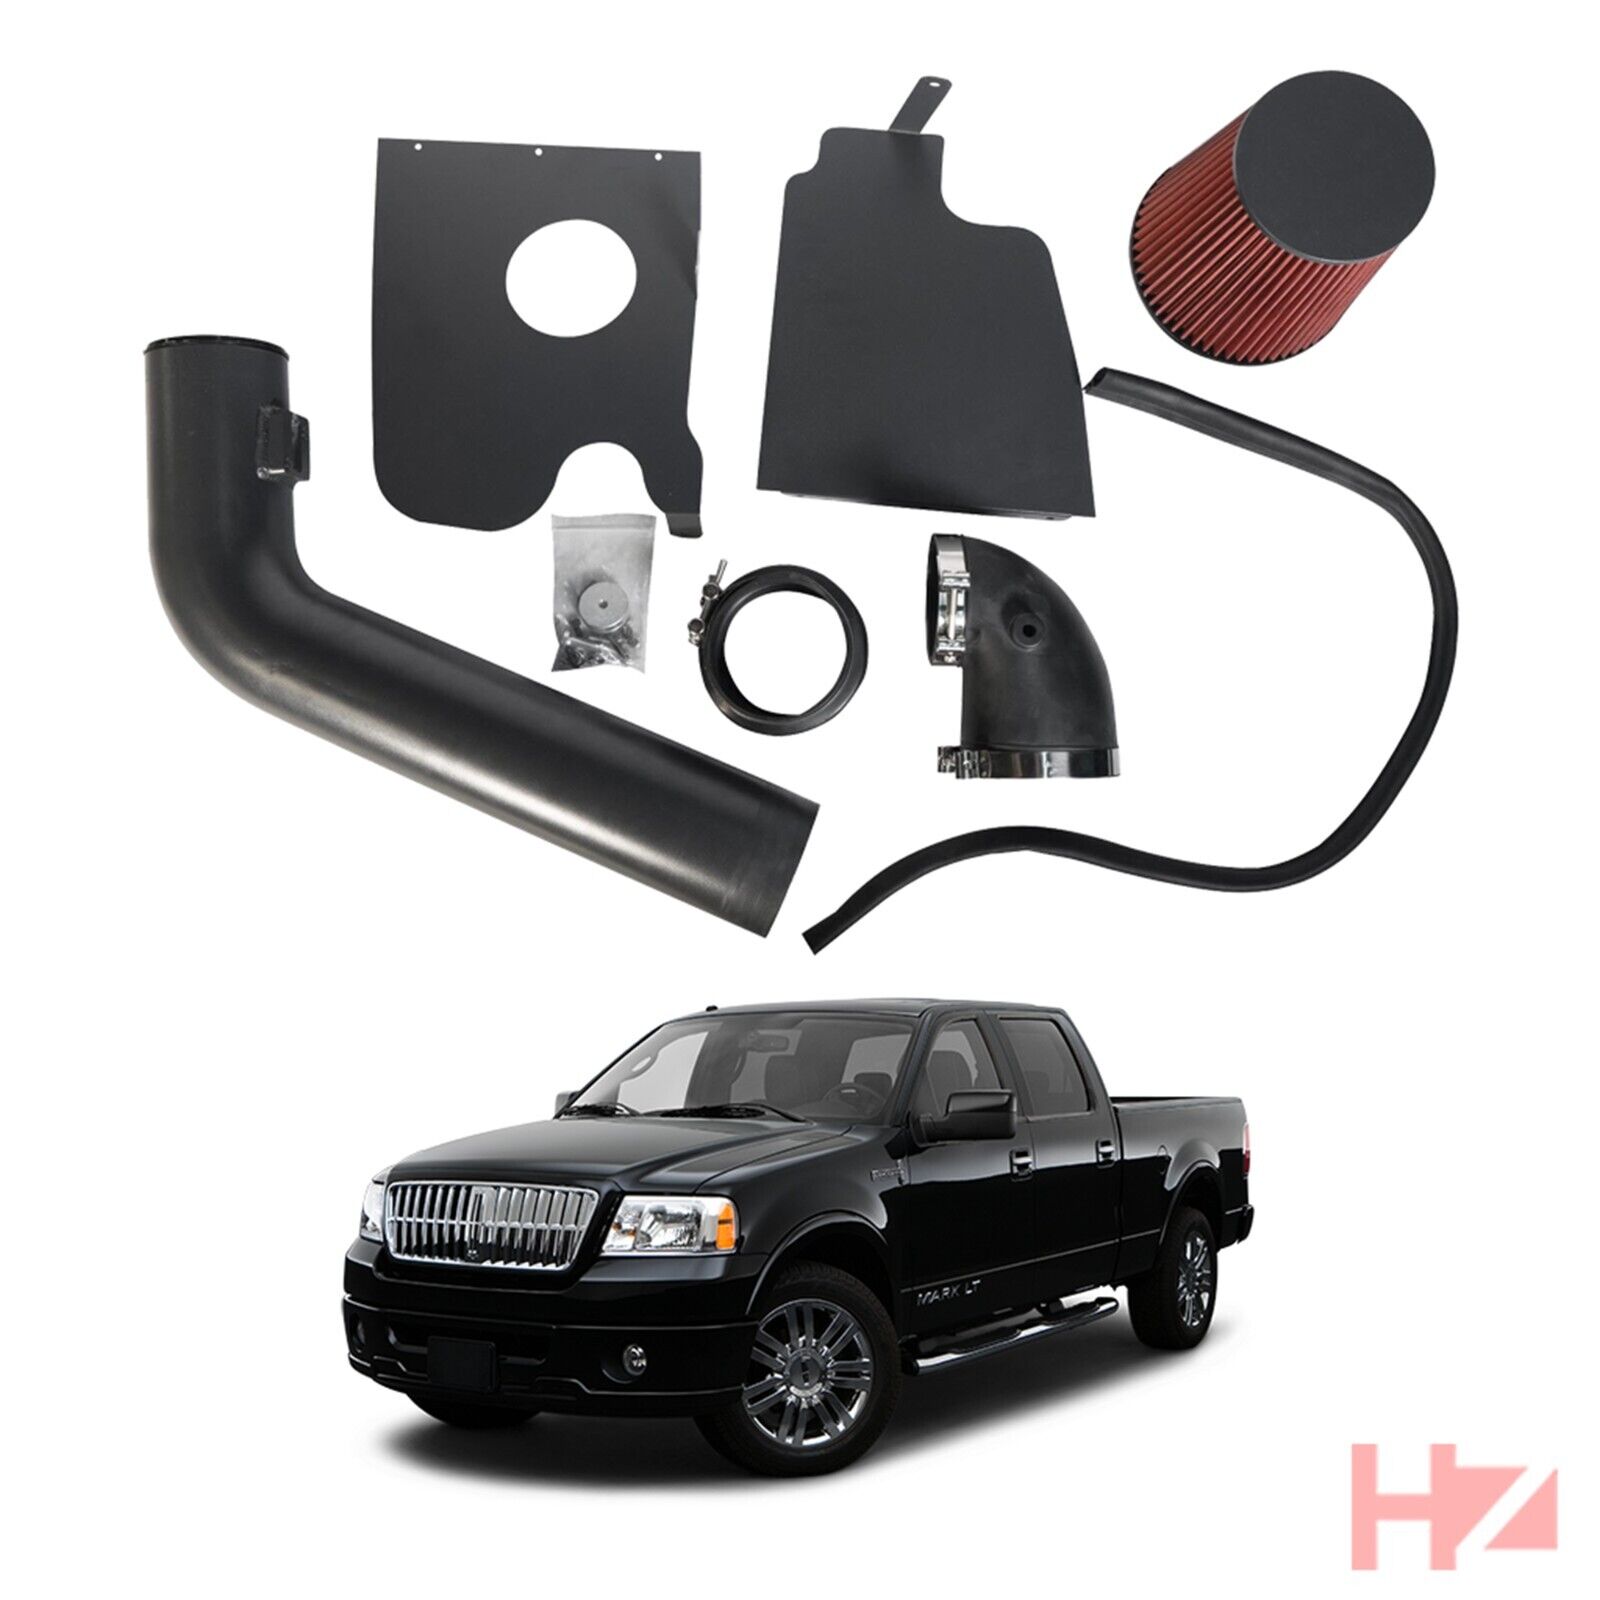 Air Intake for 2006-2008 06 07 08 Lincoln Mark LT 5.4L V8 with Heat Shield